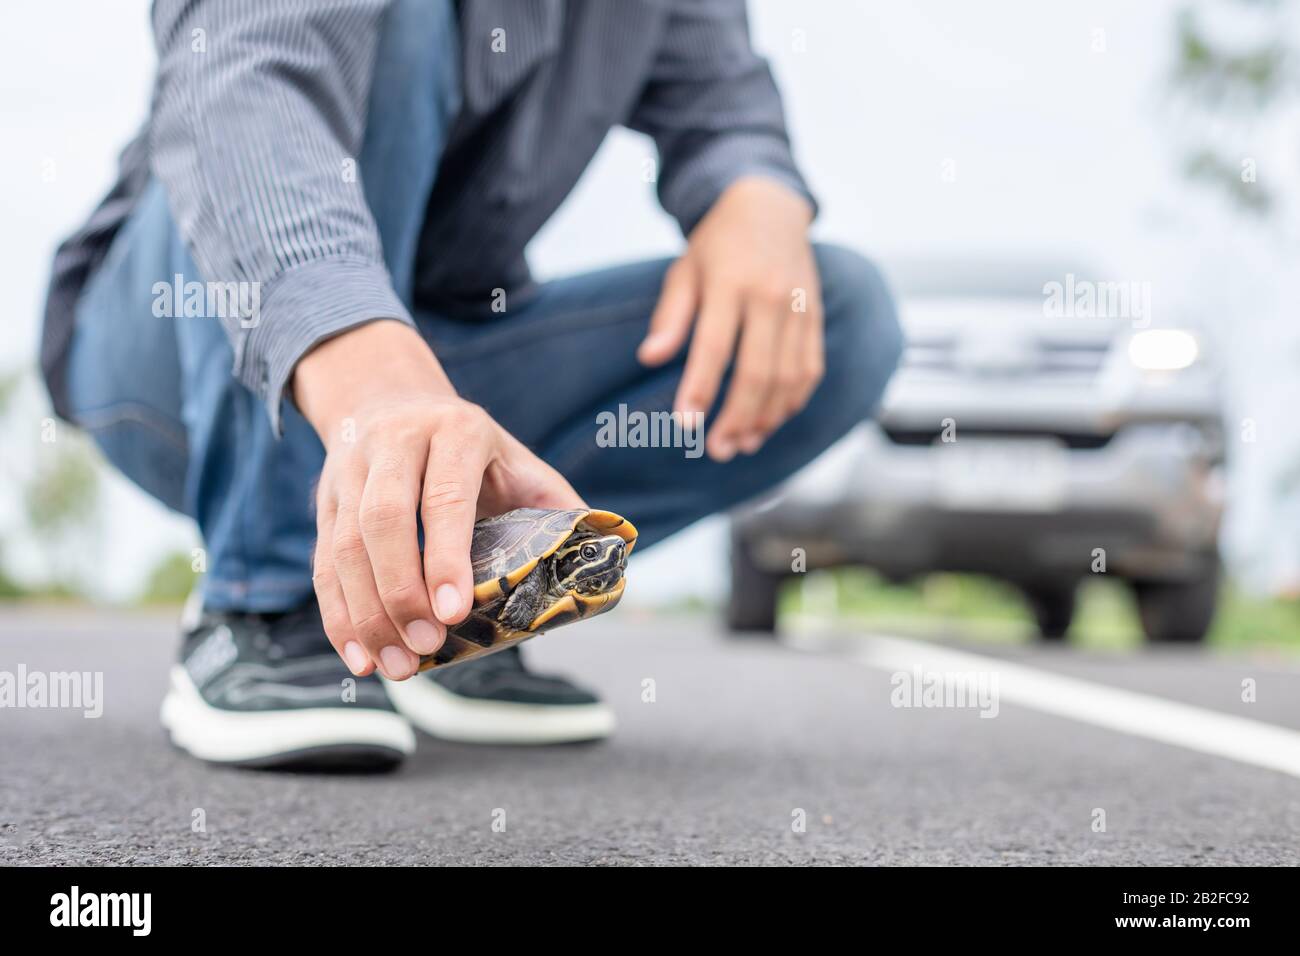 Turtle crossing the road. Driver stop the car and help turtle on the road. Safety and be careful driving concept Stock Photo